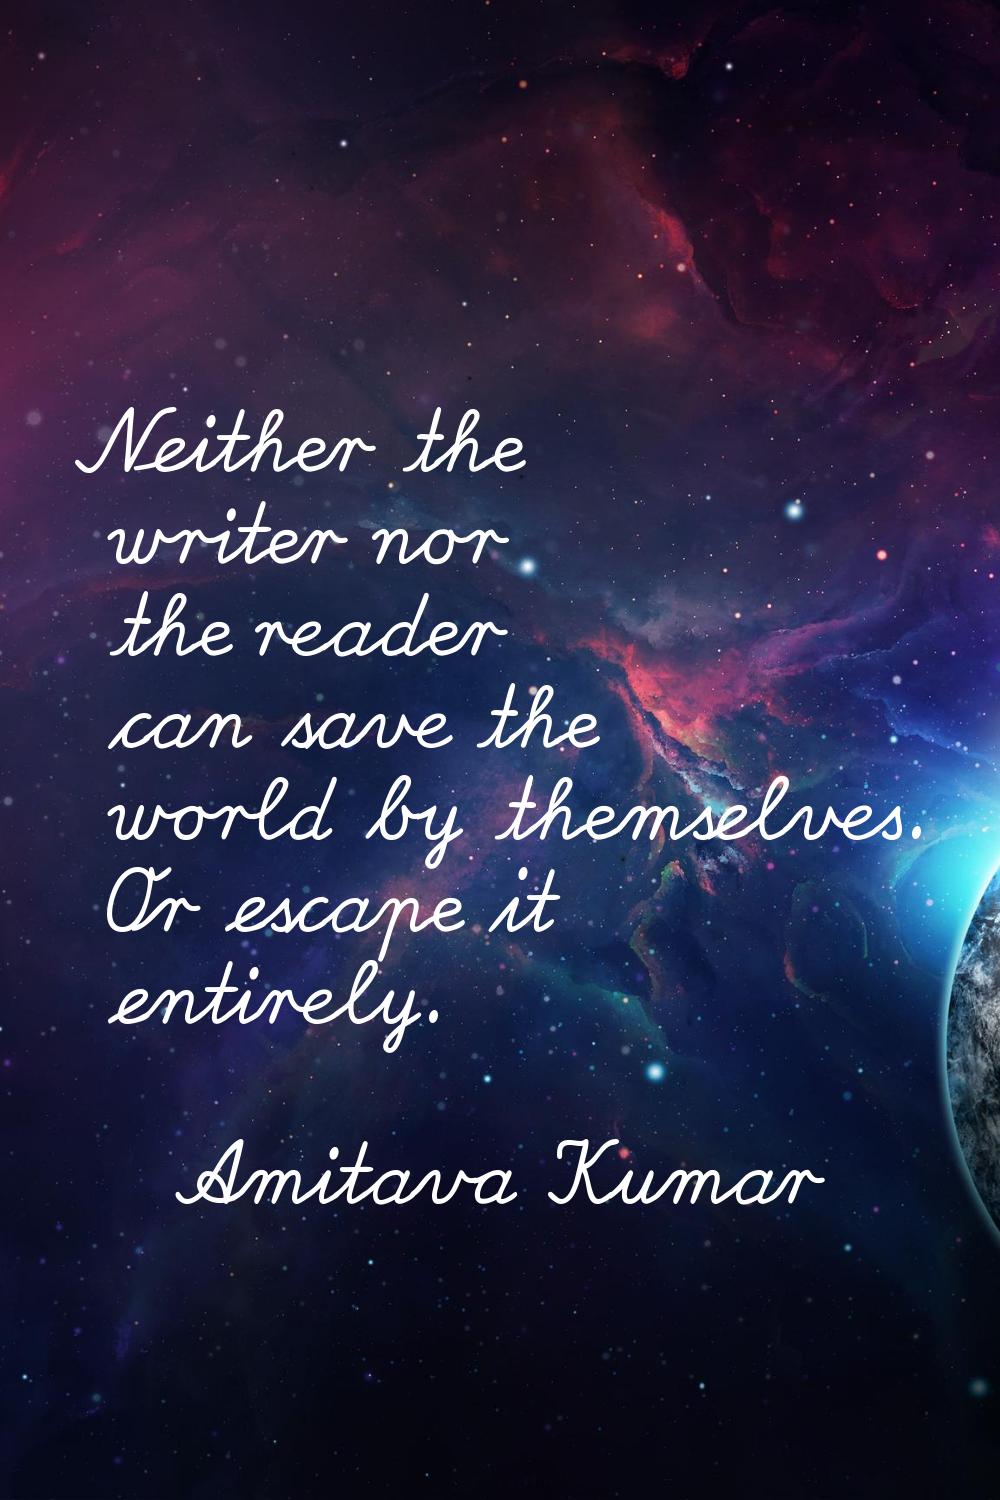 Neither the writer nor the reader can save the world by themselves. Or escape it entirely.